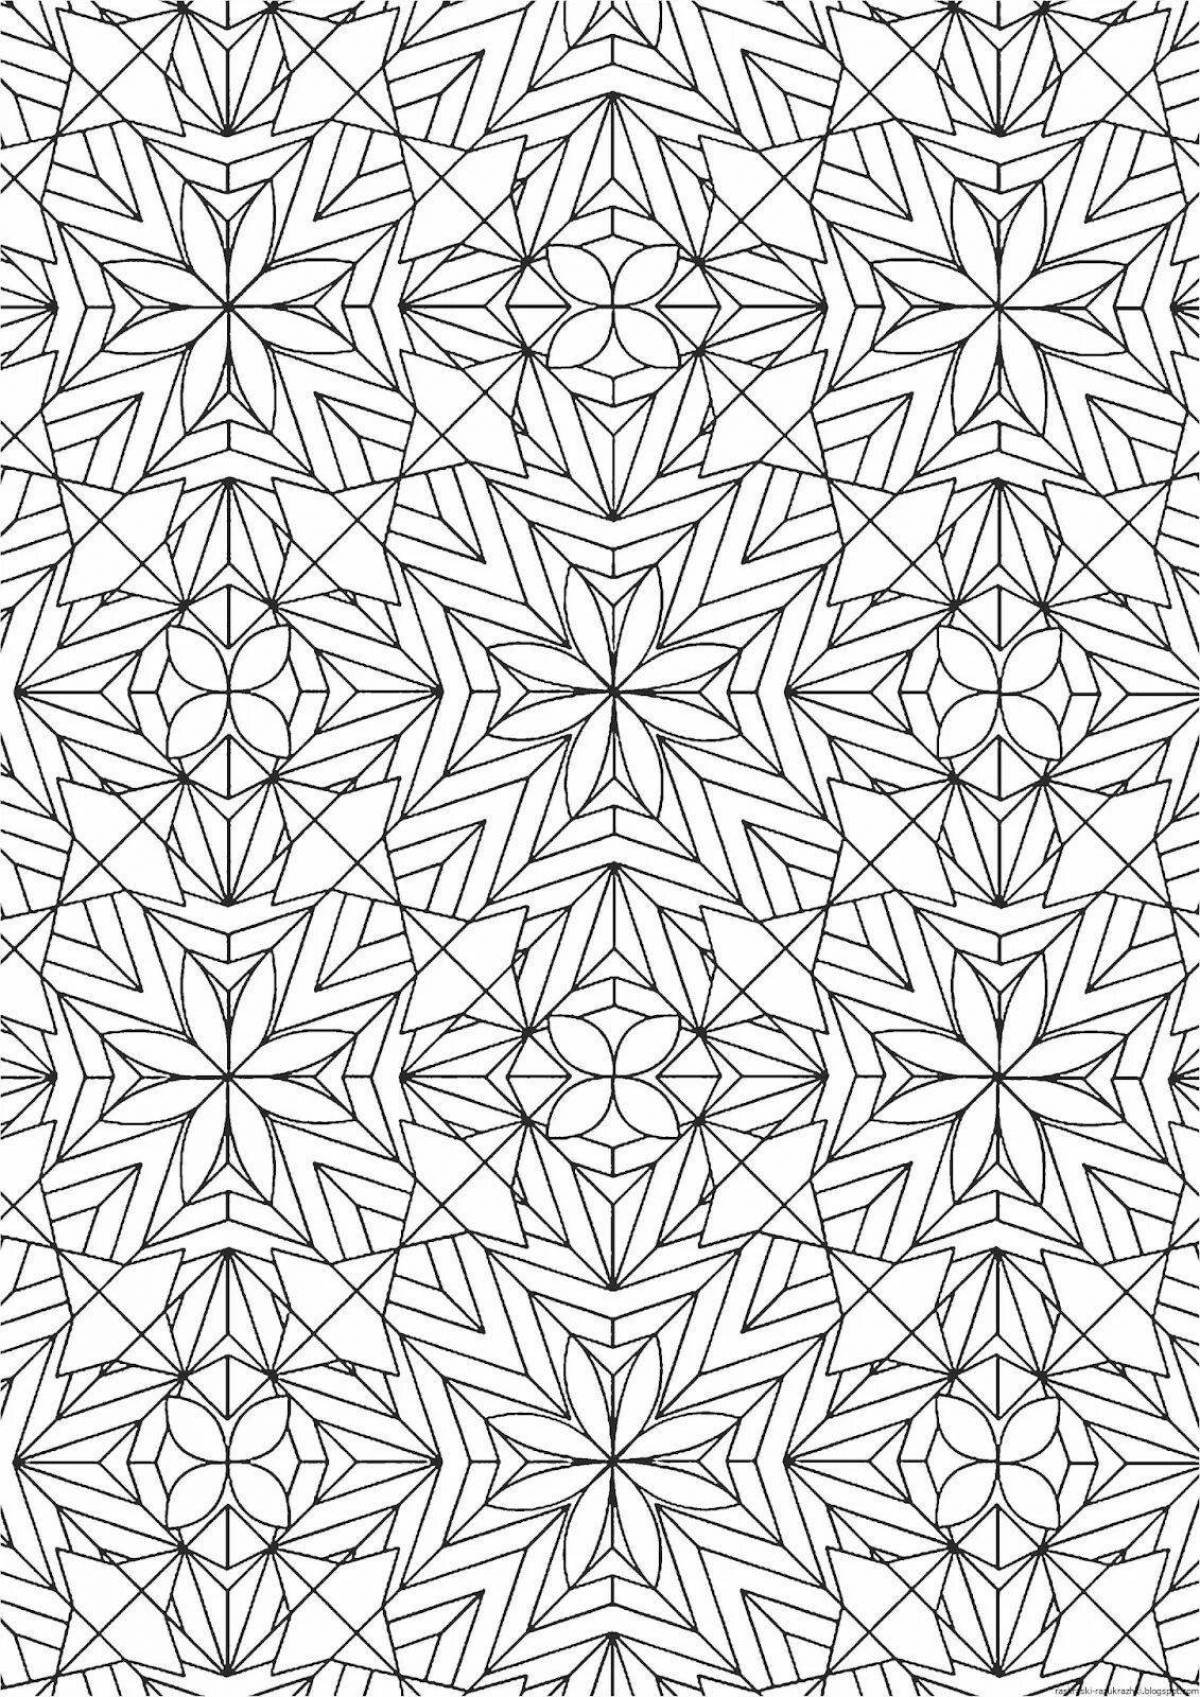 Attractive patterns and ornaments for coloring